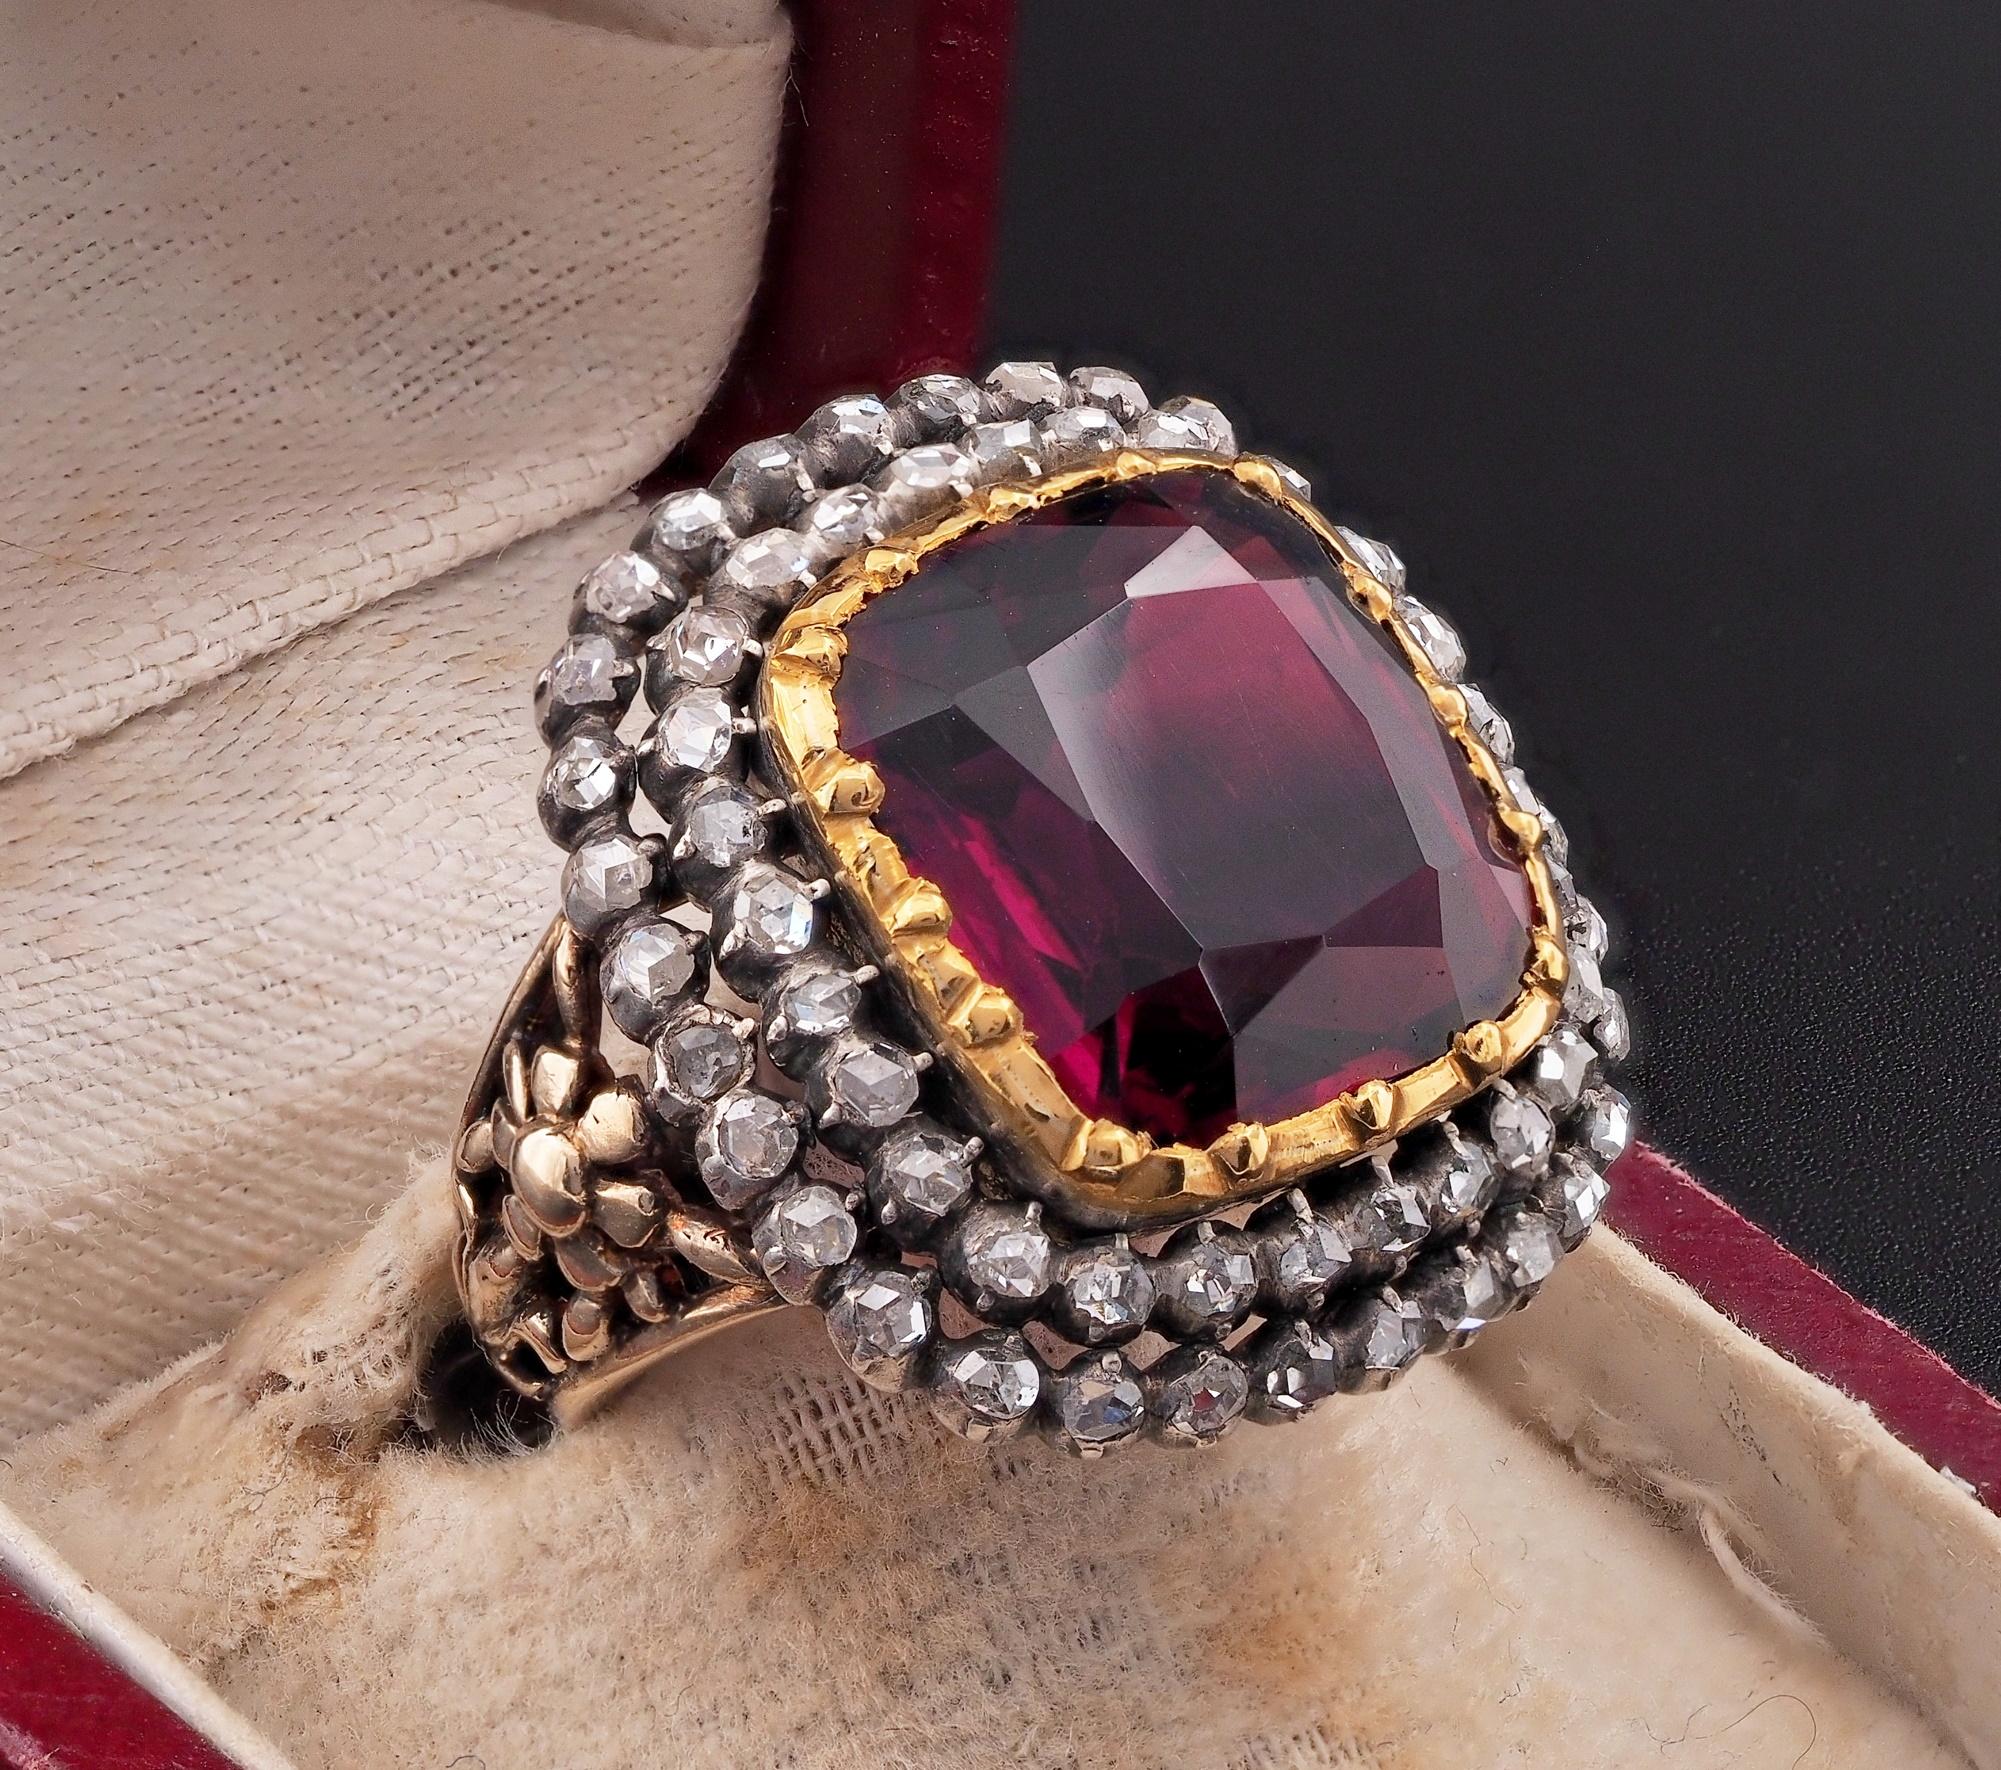 Victorian 10.95 CT Untreated Magenta Rubellite or Red Tourmaline Diamond Ring For Sale 2